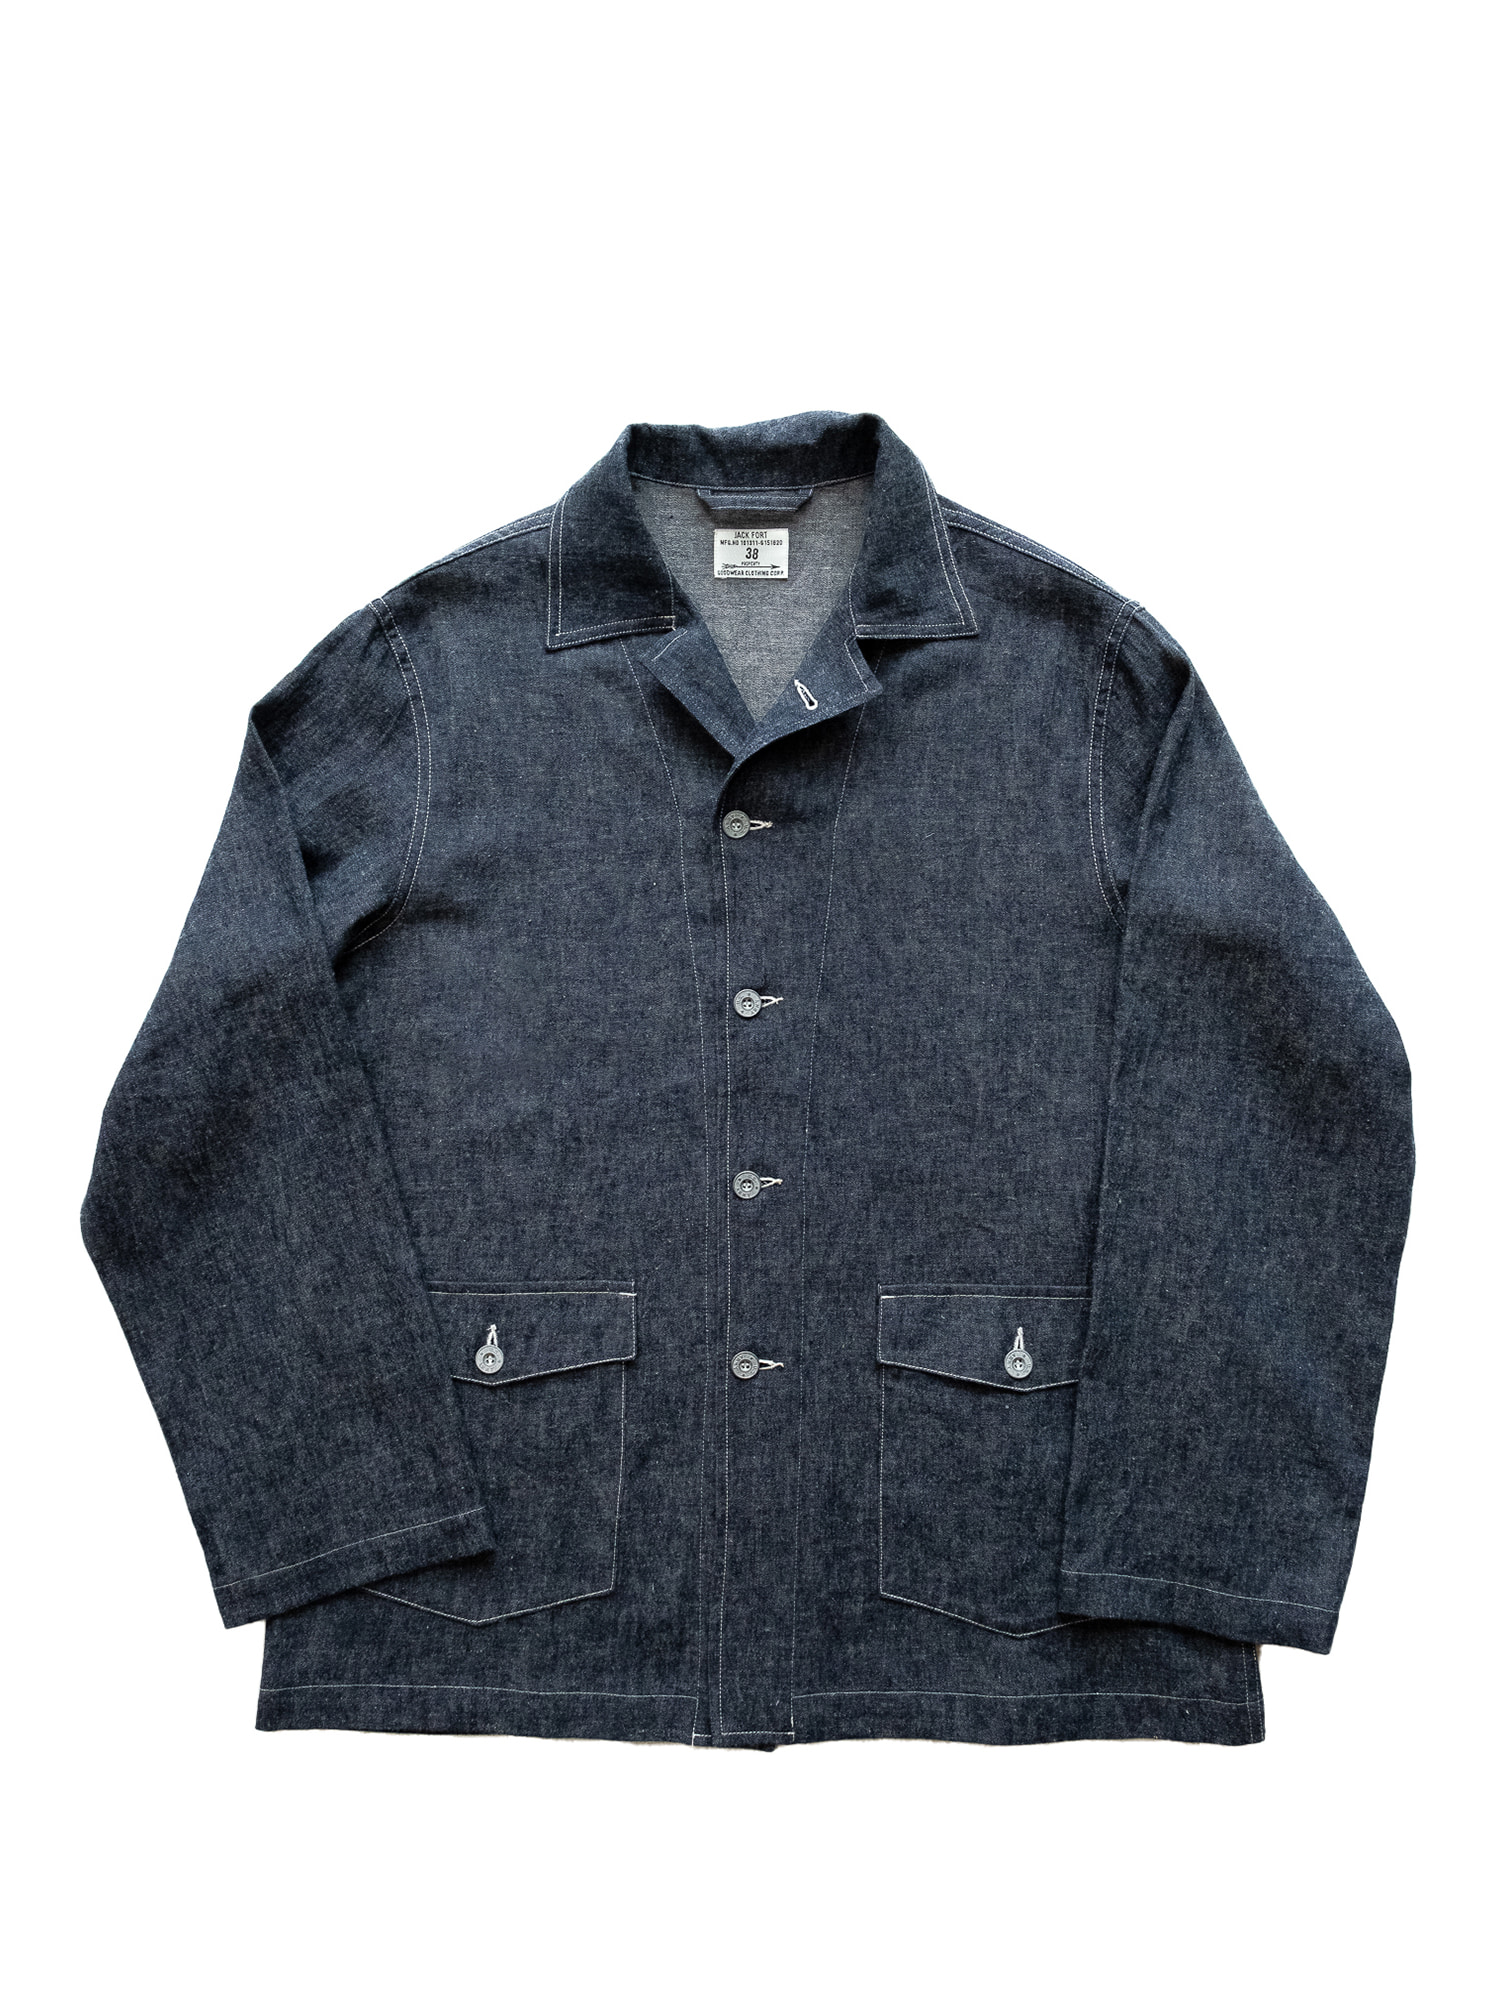 Coverall Work Jacket - Denim Chambray